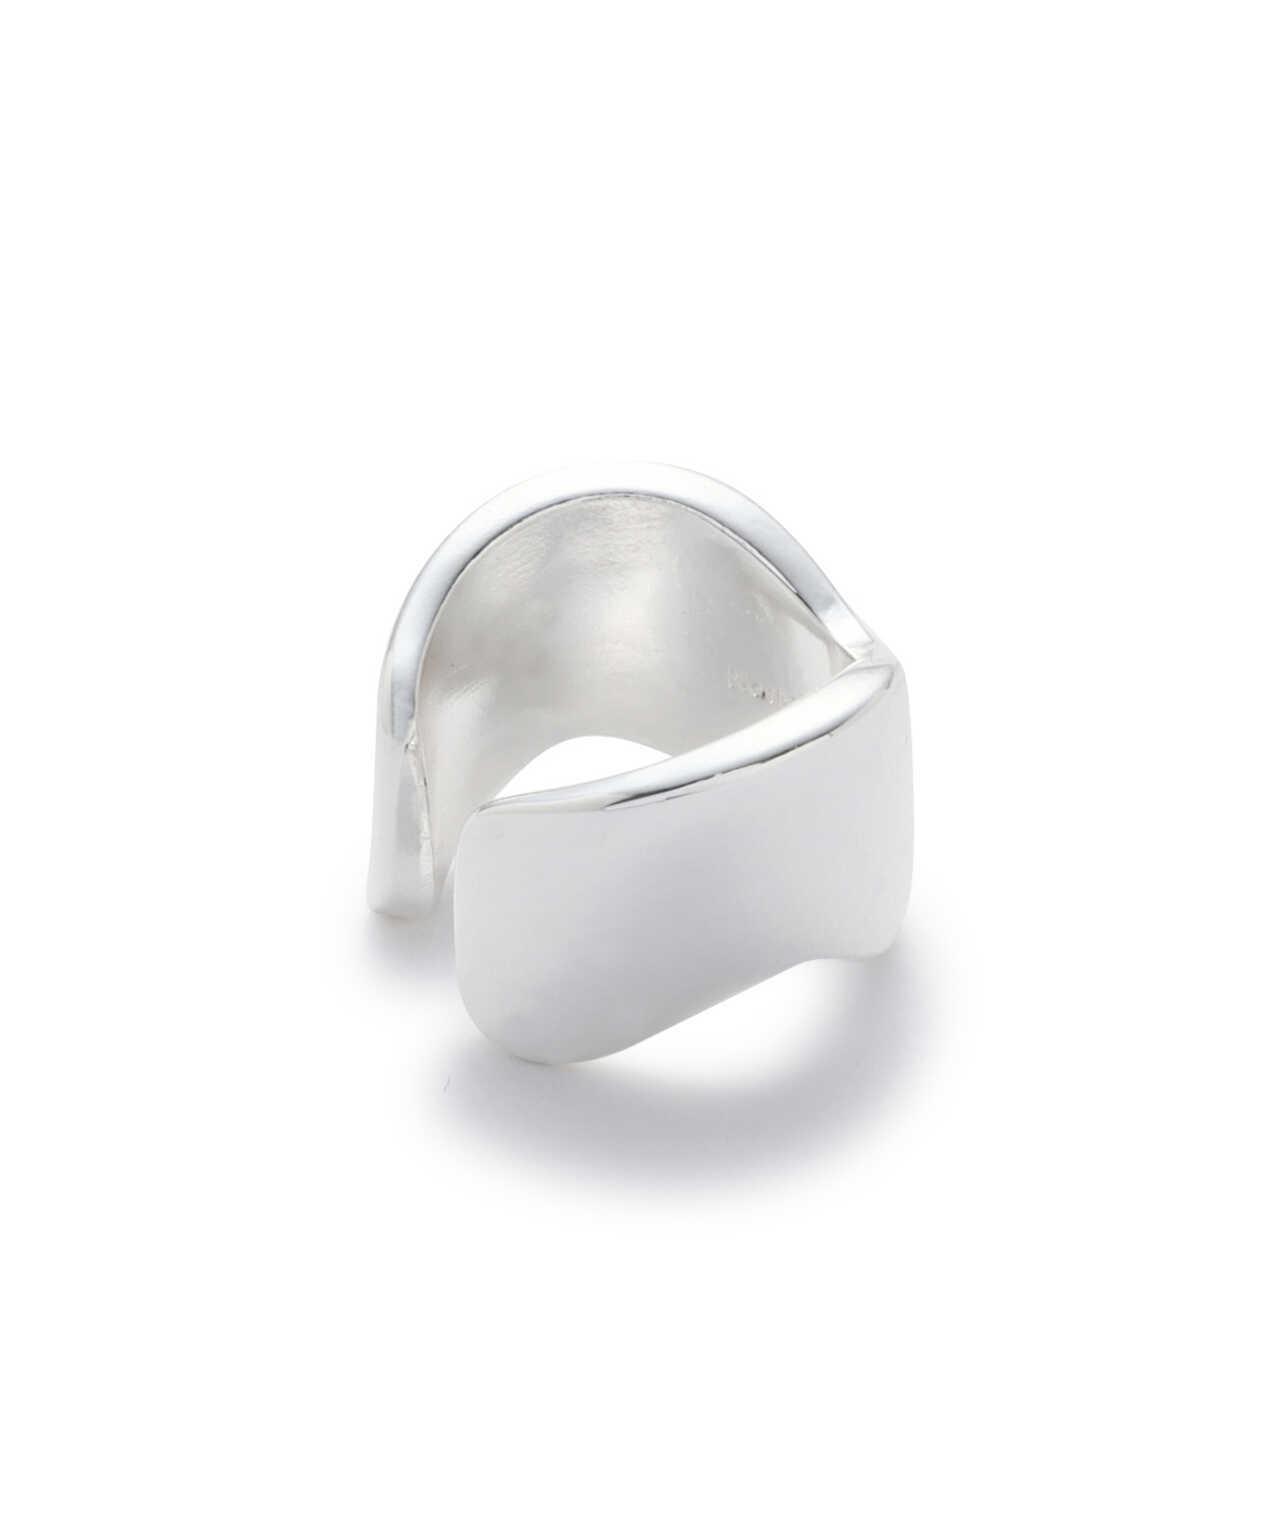 Nothing and Others/Thickness asymmetry wave Ring | ROYAL FLASH